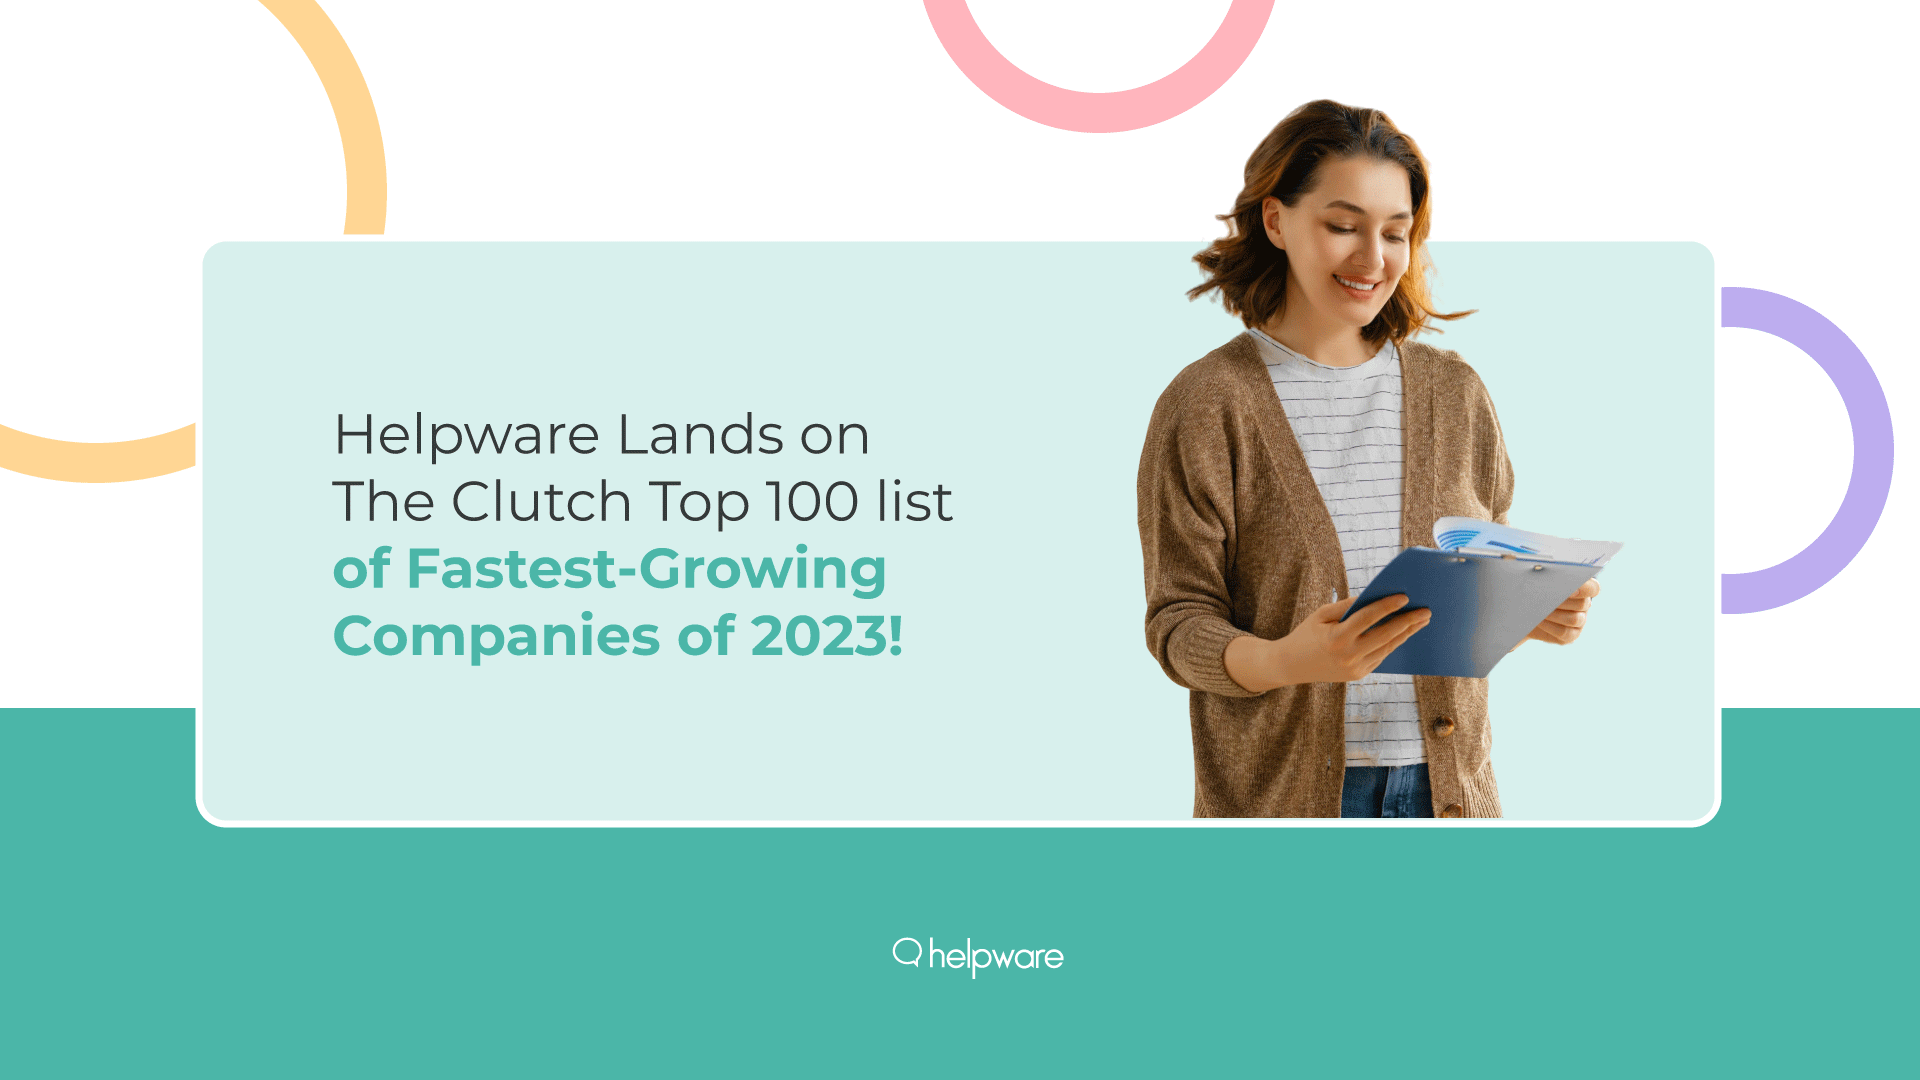 Helpware Is On The List Of Clutch's Top 100 Fastest-Growing Companies of 2023